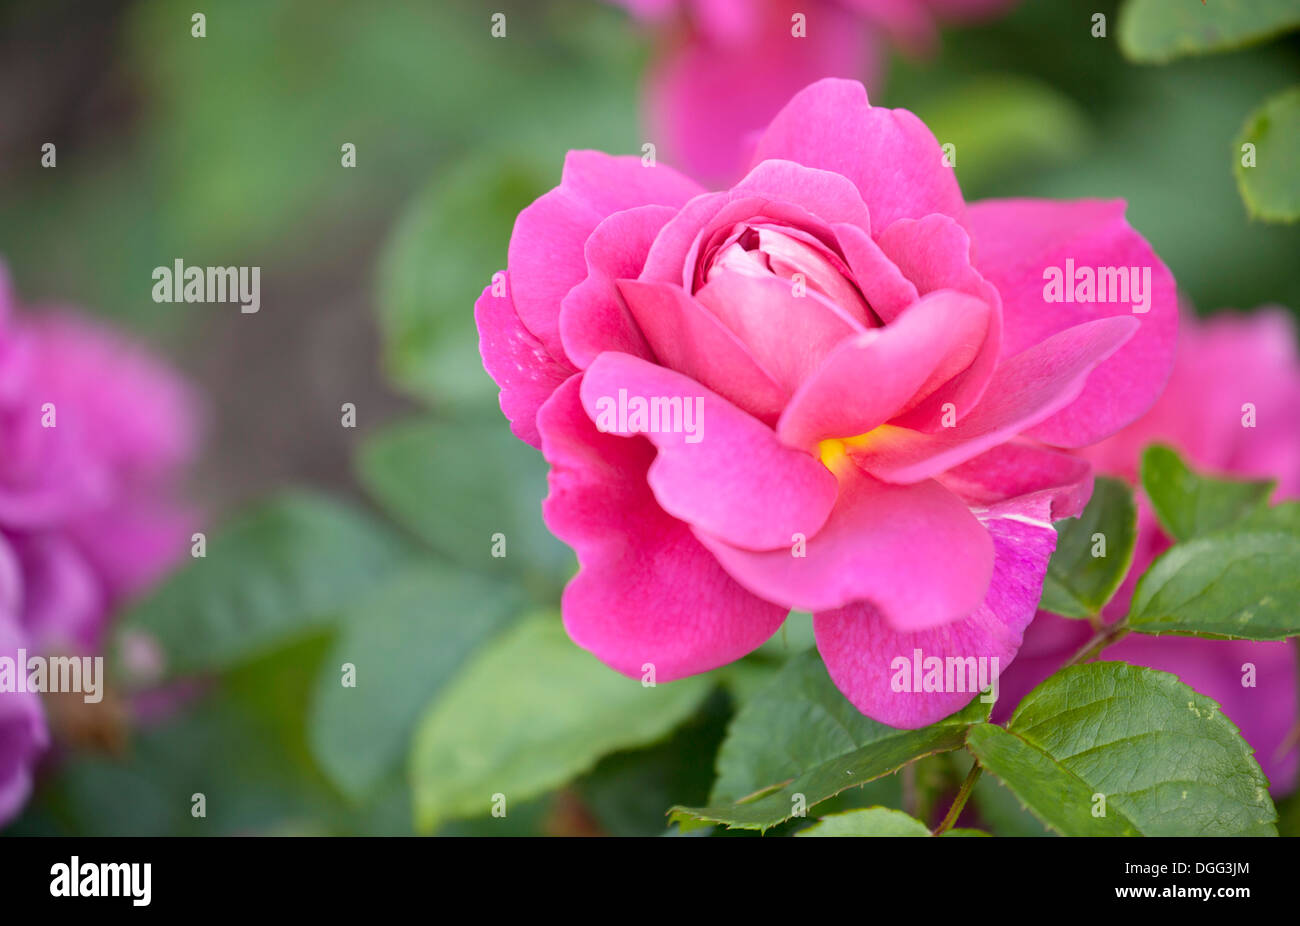 Close up of cerise pink Rose Princess Anne with shallow depth of field. Stock Photo